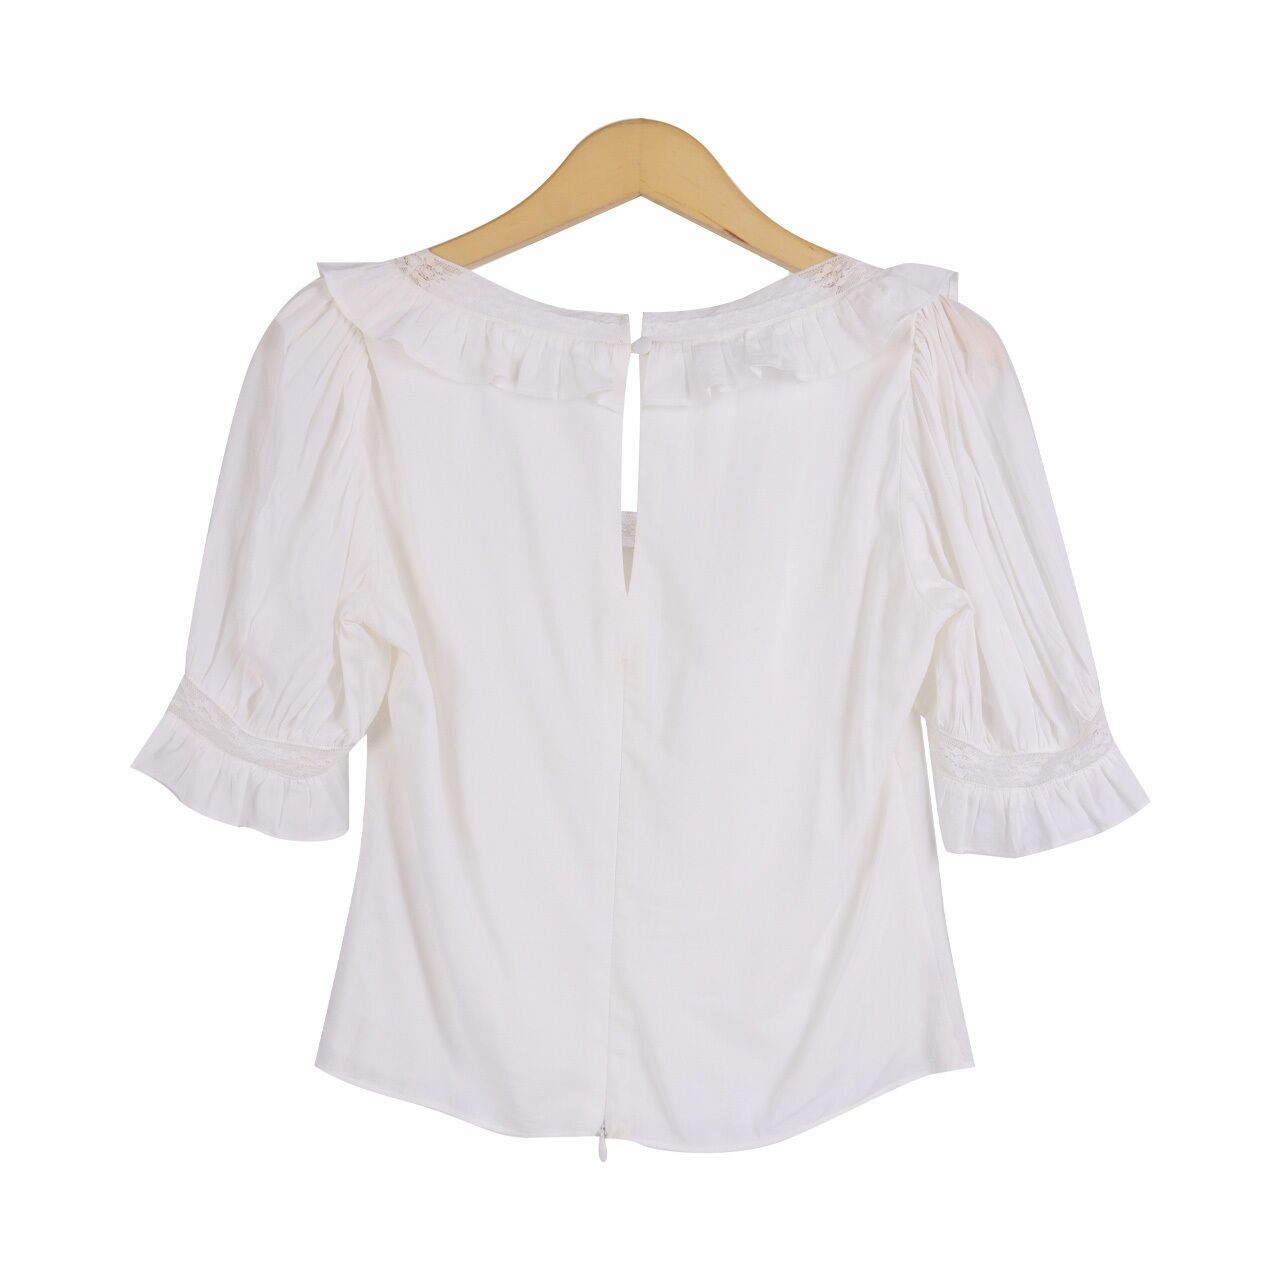 Reformation White Blouse